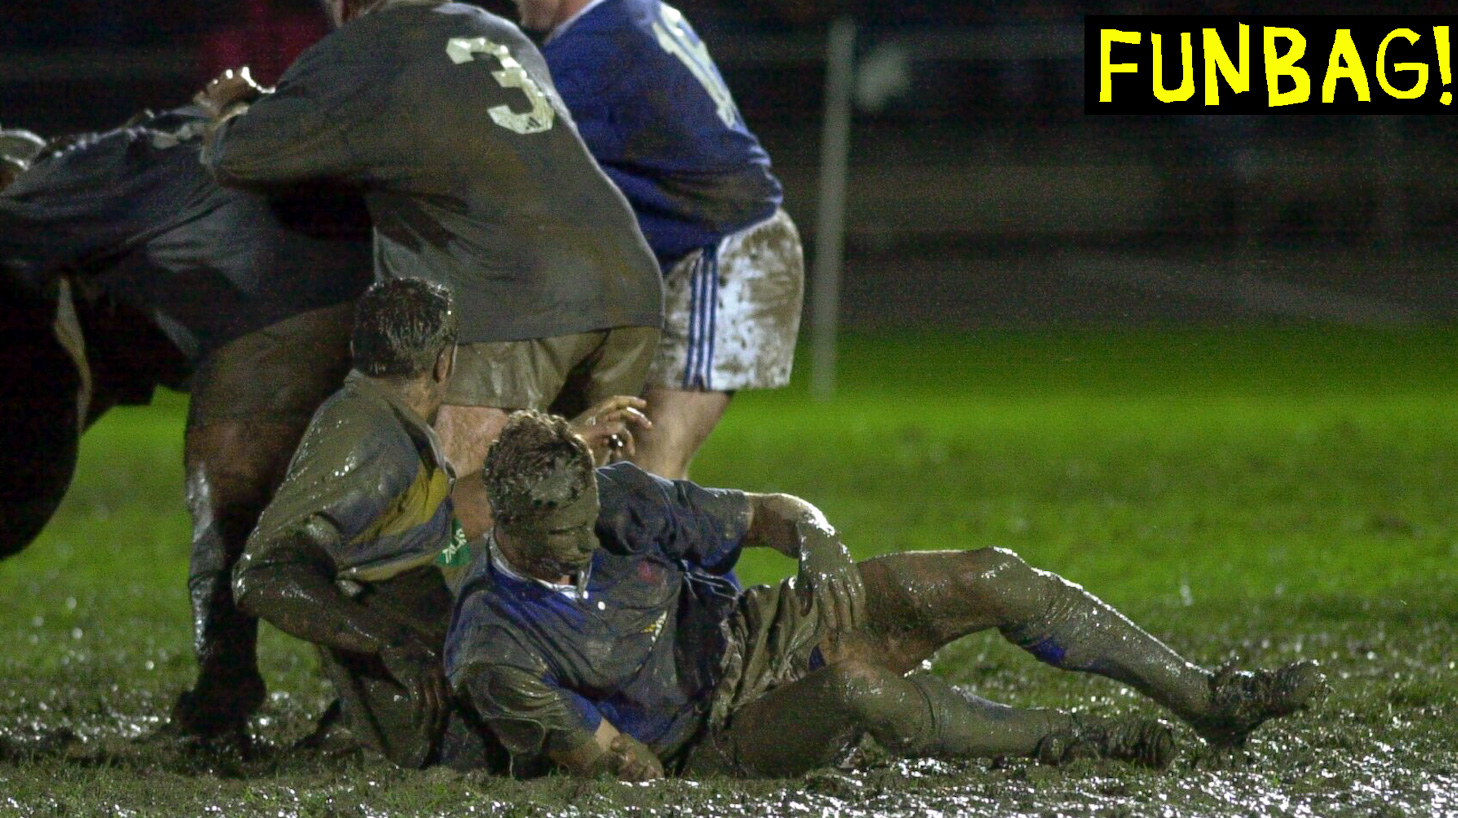 NEW ZEALAND - SEPTEMBER 09: Nelson Bays Brett Wallace extracts himself from the mud in his teams 2026 loss to Bay of Plenty in the Air New Zealand NPC second division match at Trafalgar Park, Nelson, Saturday. (Photo by Ross Land/Getty Images)